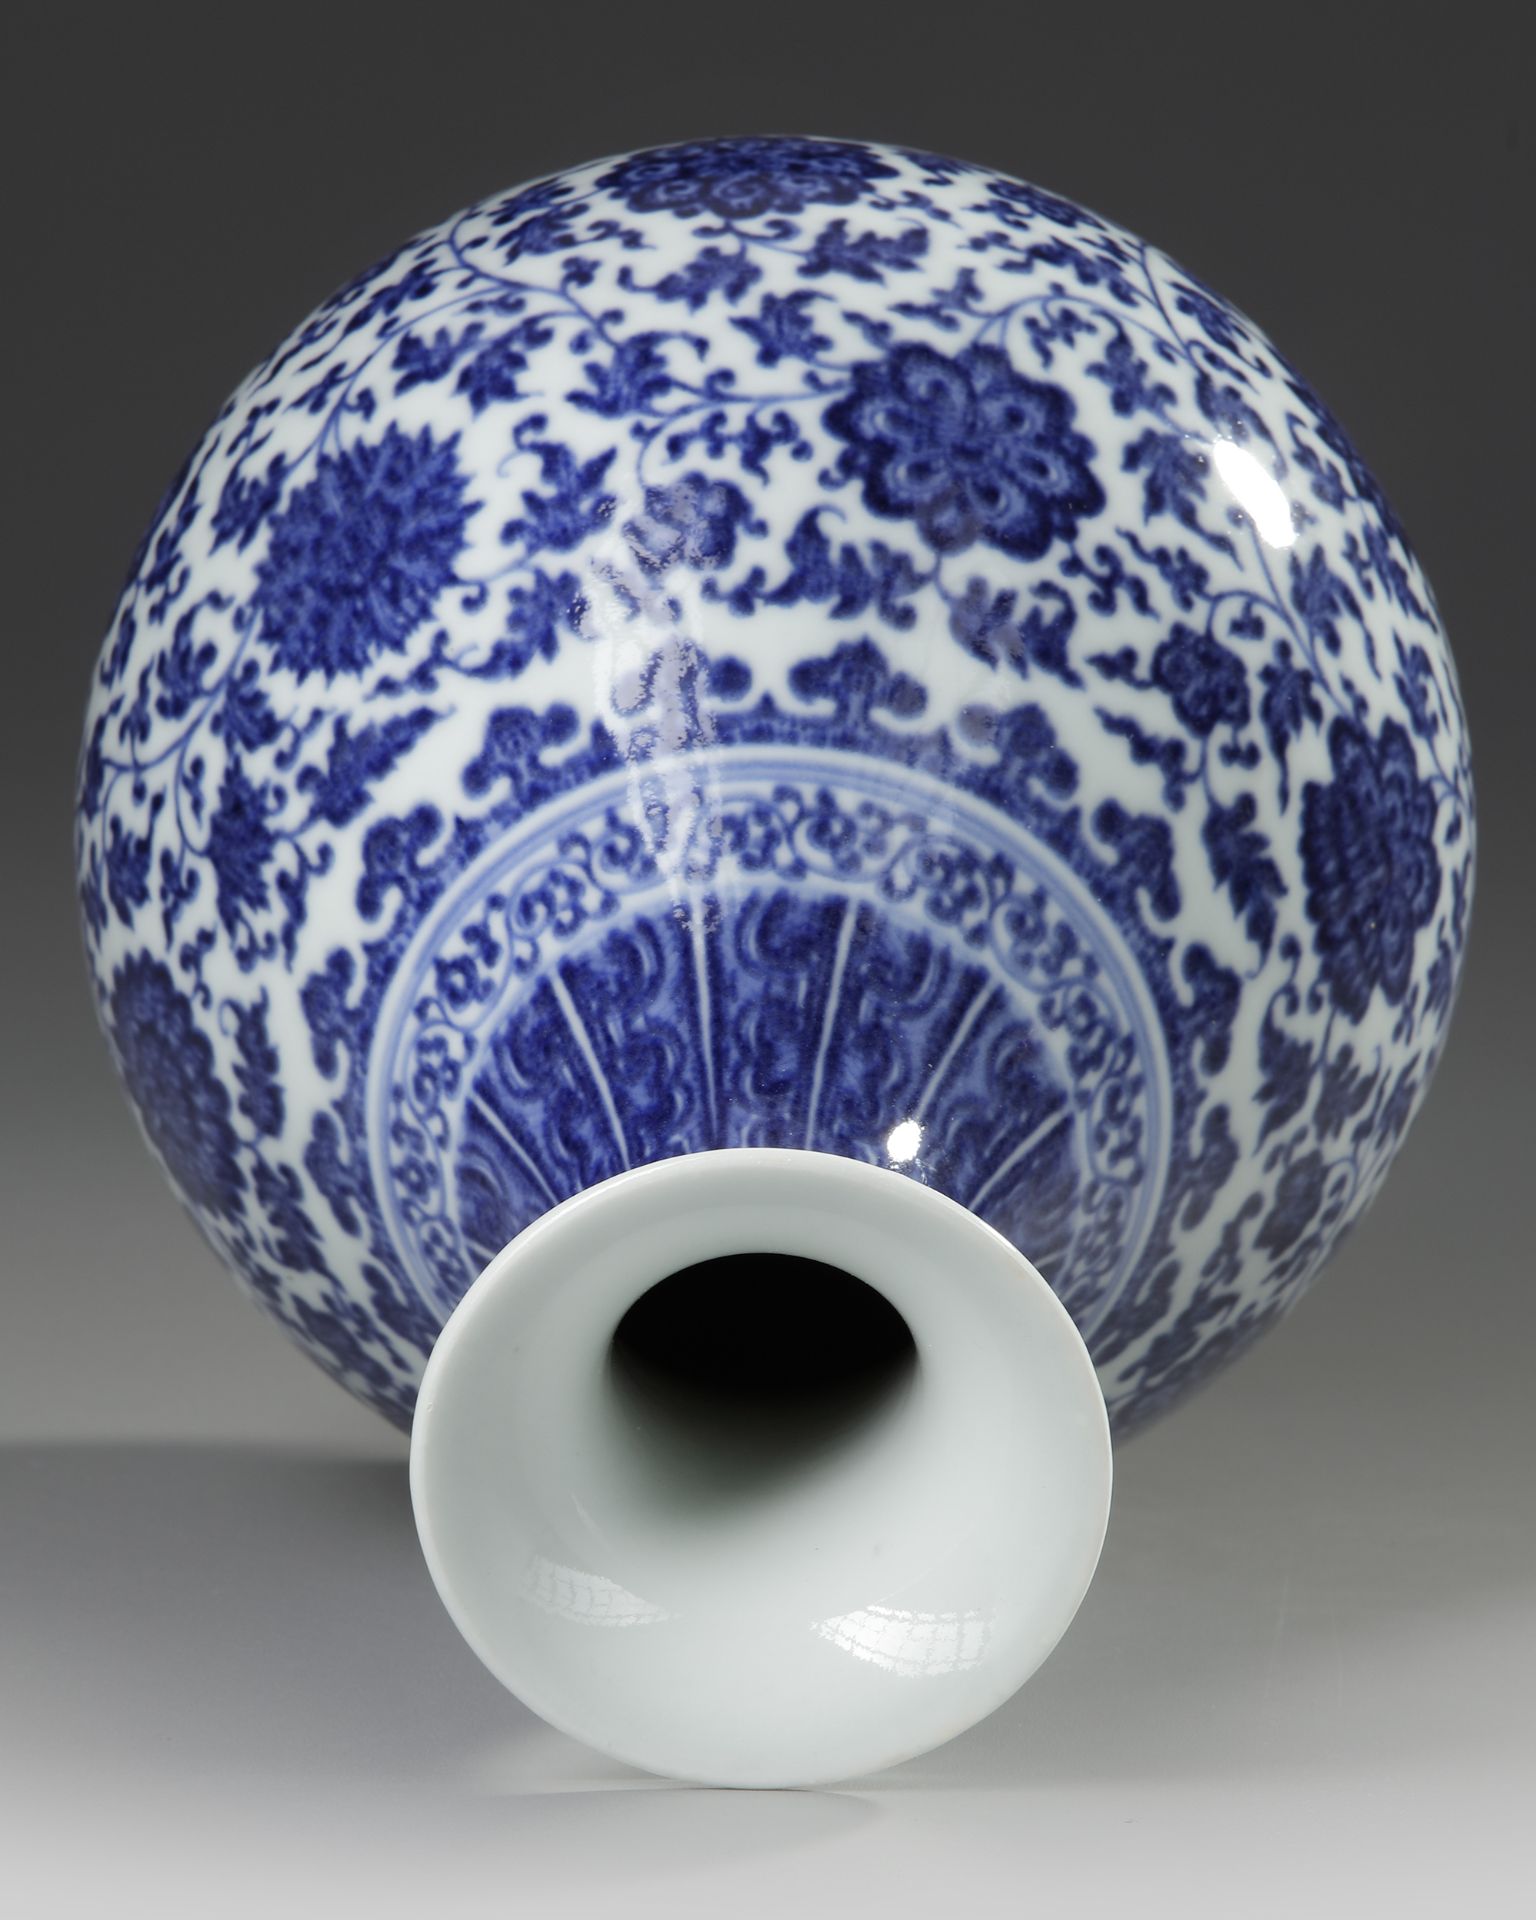 A CHINESE UNDER-GLAZE BLUE AND WHITE MING-STYLE PEAR SHAPED VASE, QING DYNASTY (1644-1911) - Image 4 of 4